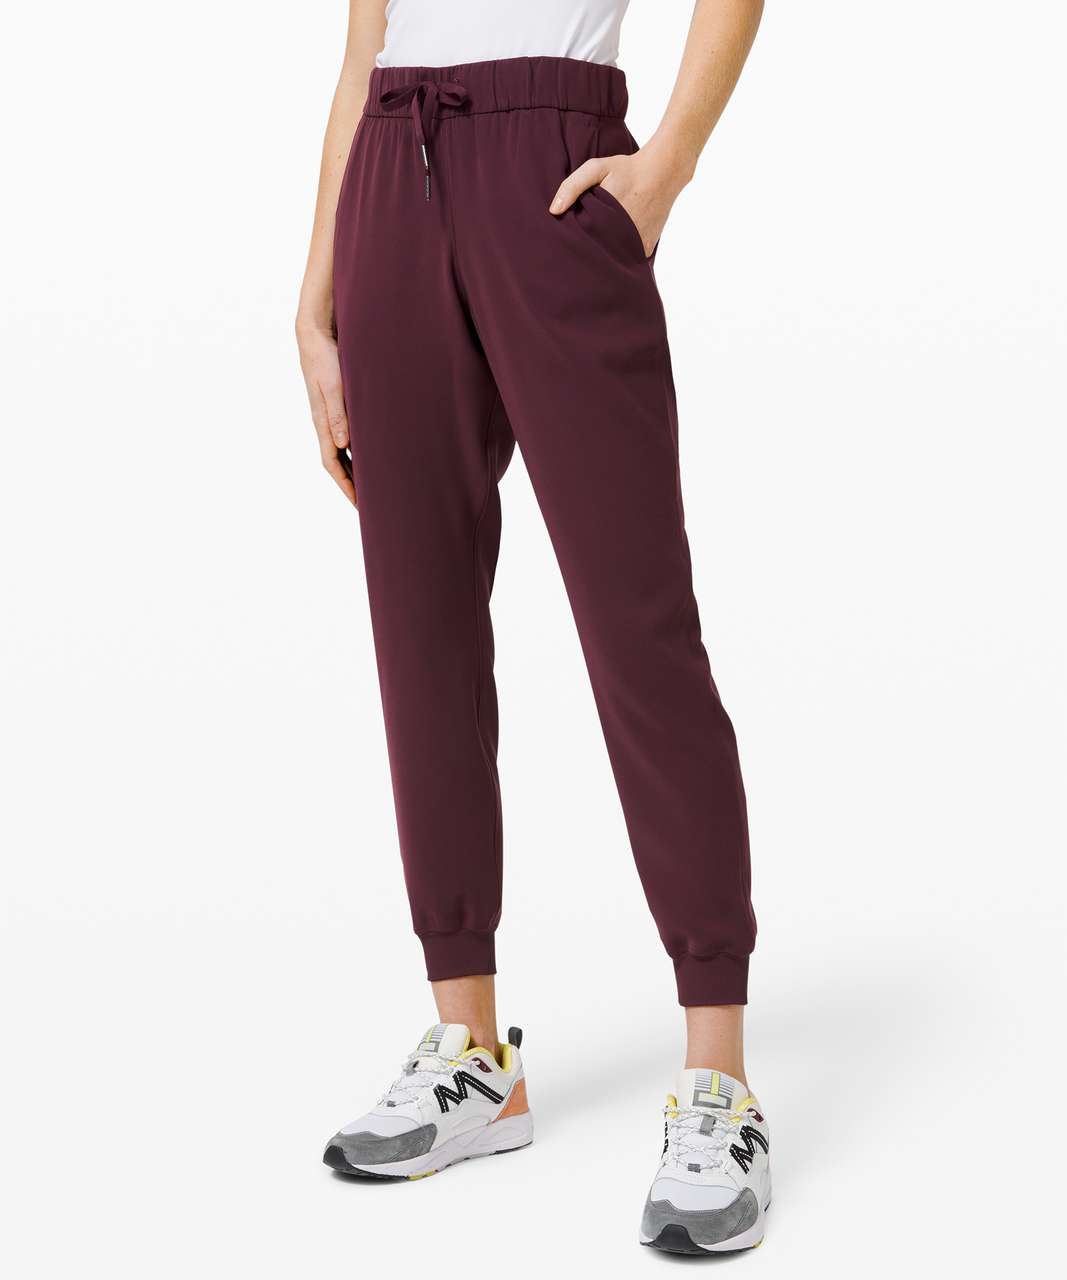 Lululemon On the Fly Jogger 28 *Woven - In Cassis and Light Grey-New -  clothing & accessories - by owner - craigslist